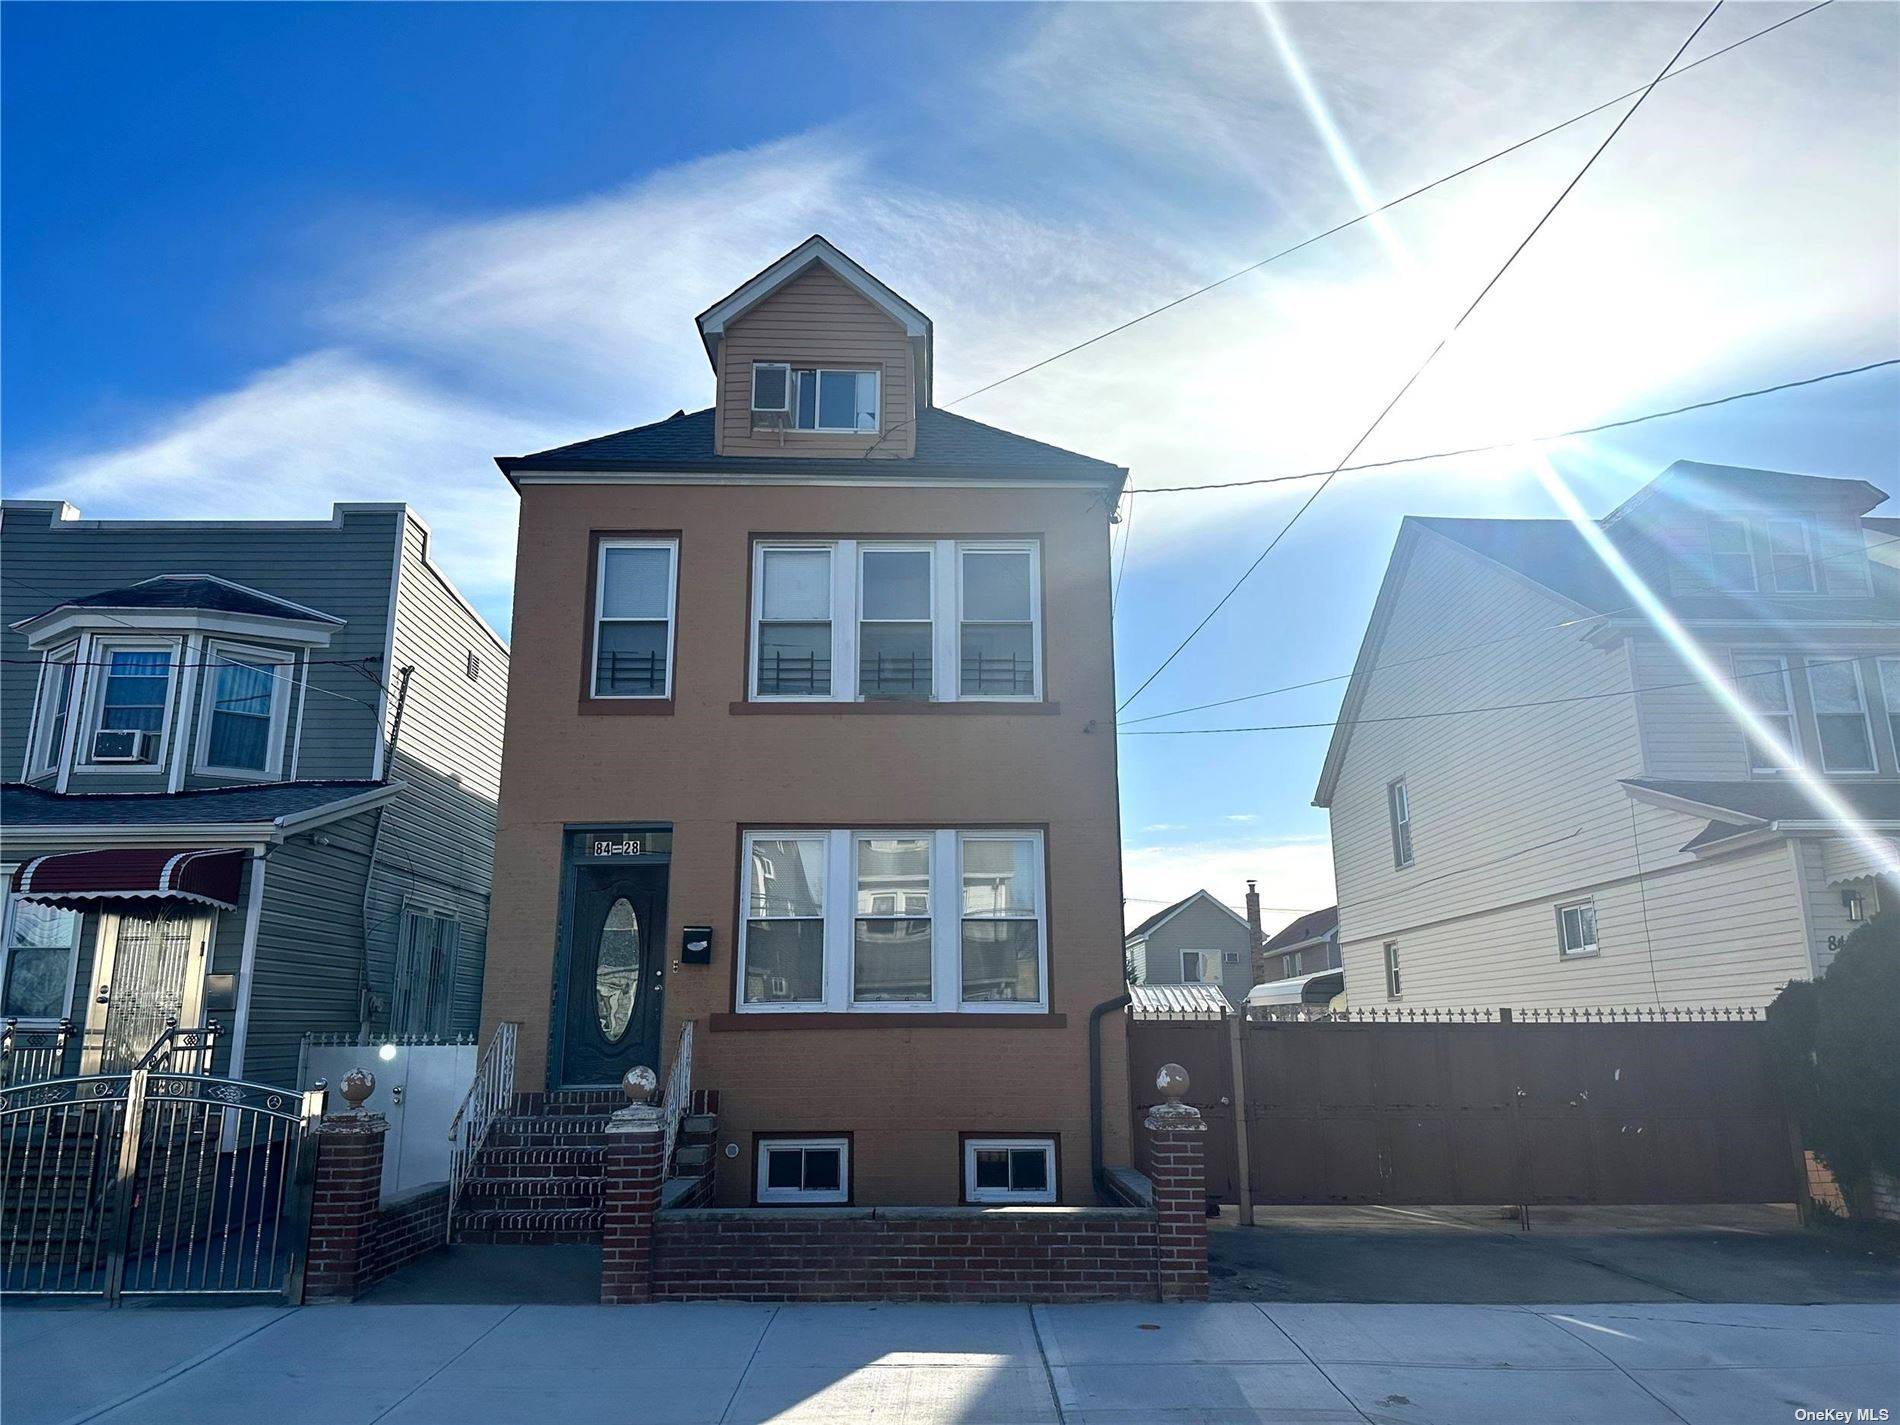 OZONE PARK TWO FAMILY HOUSE WITH LOT INCLUDED IN SALE.